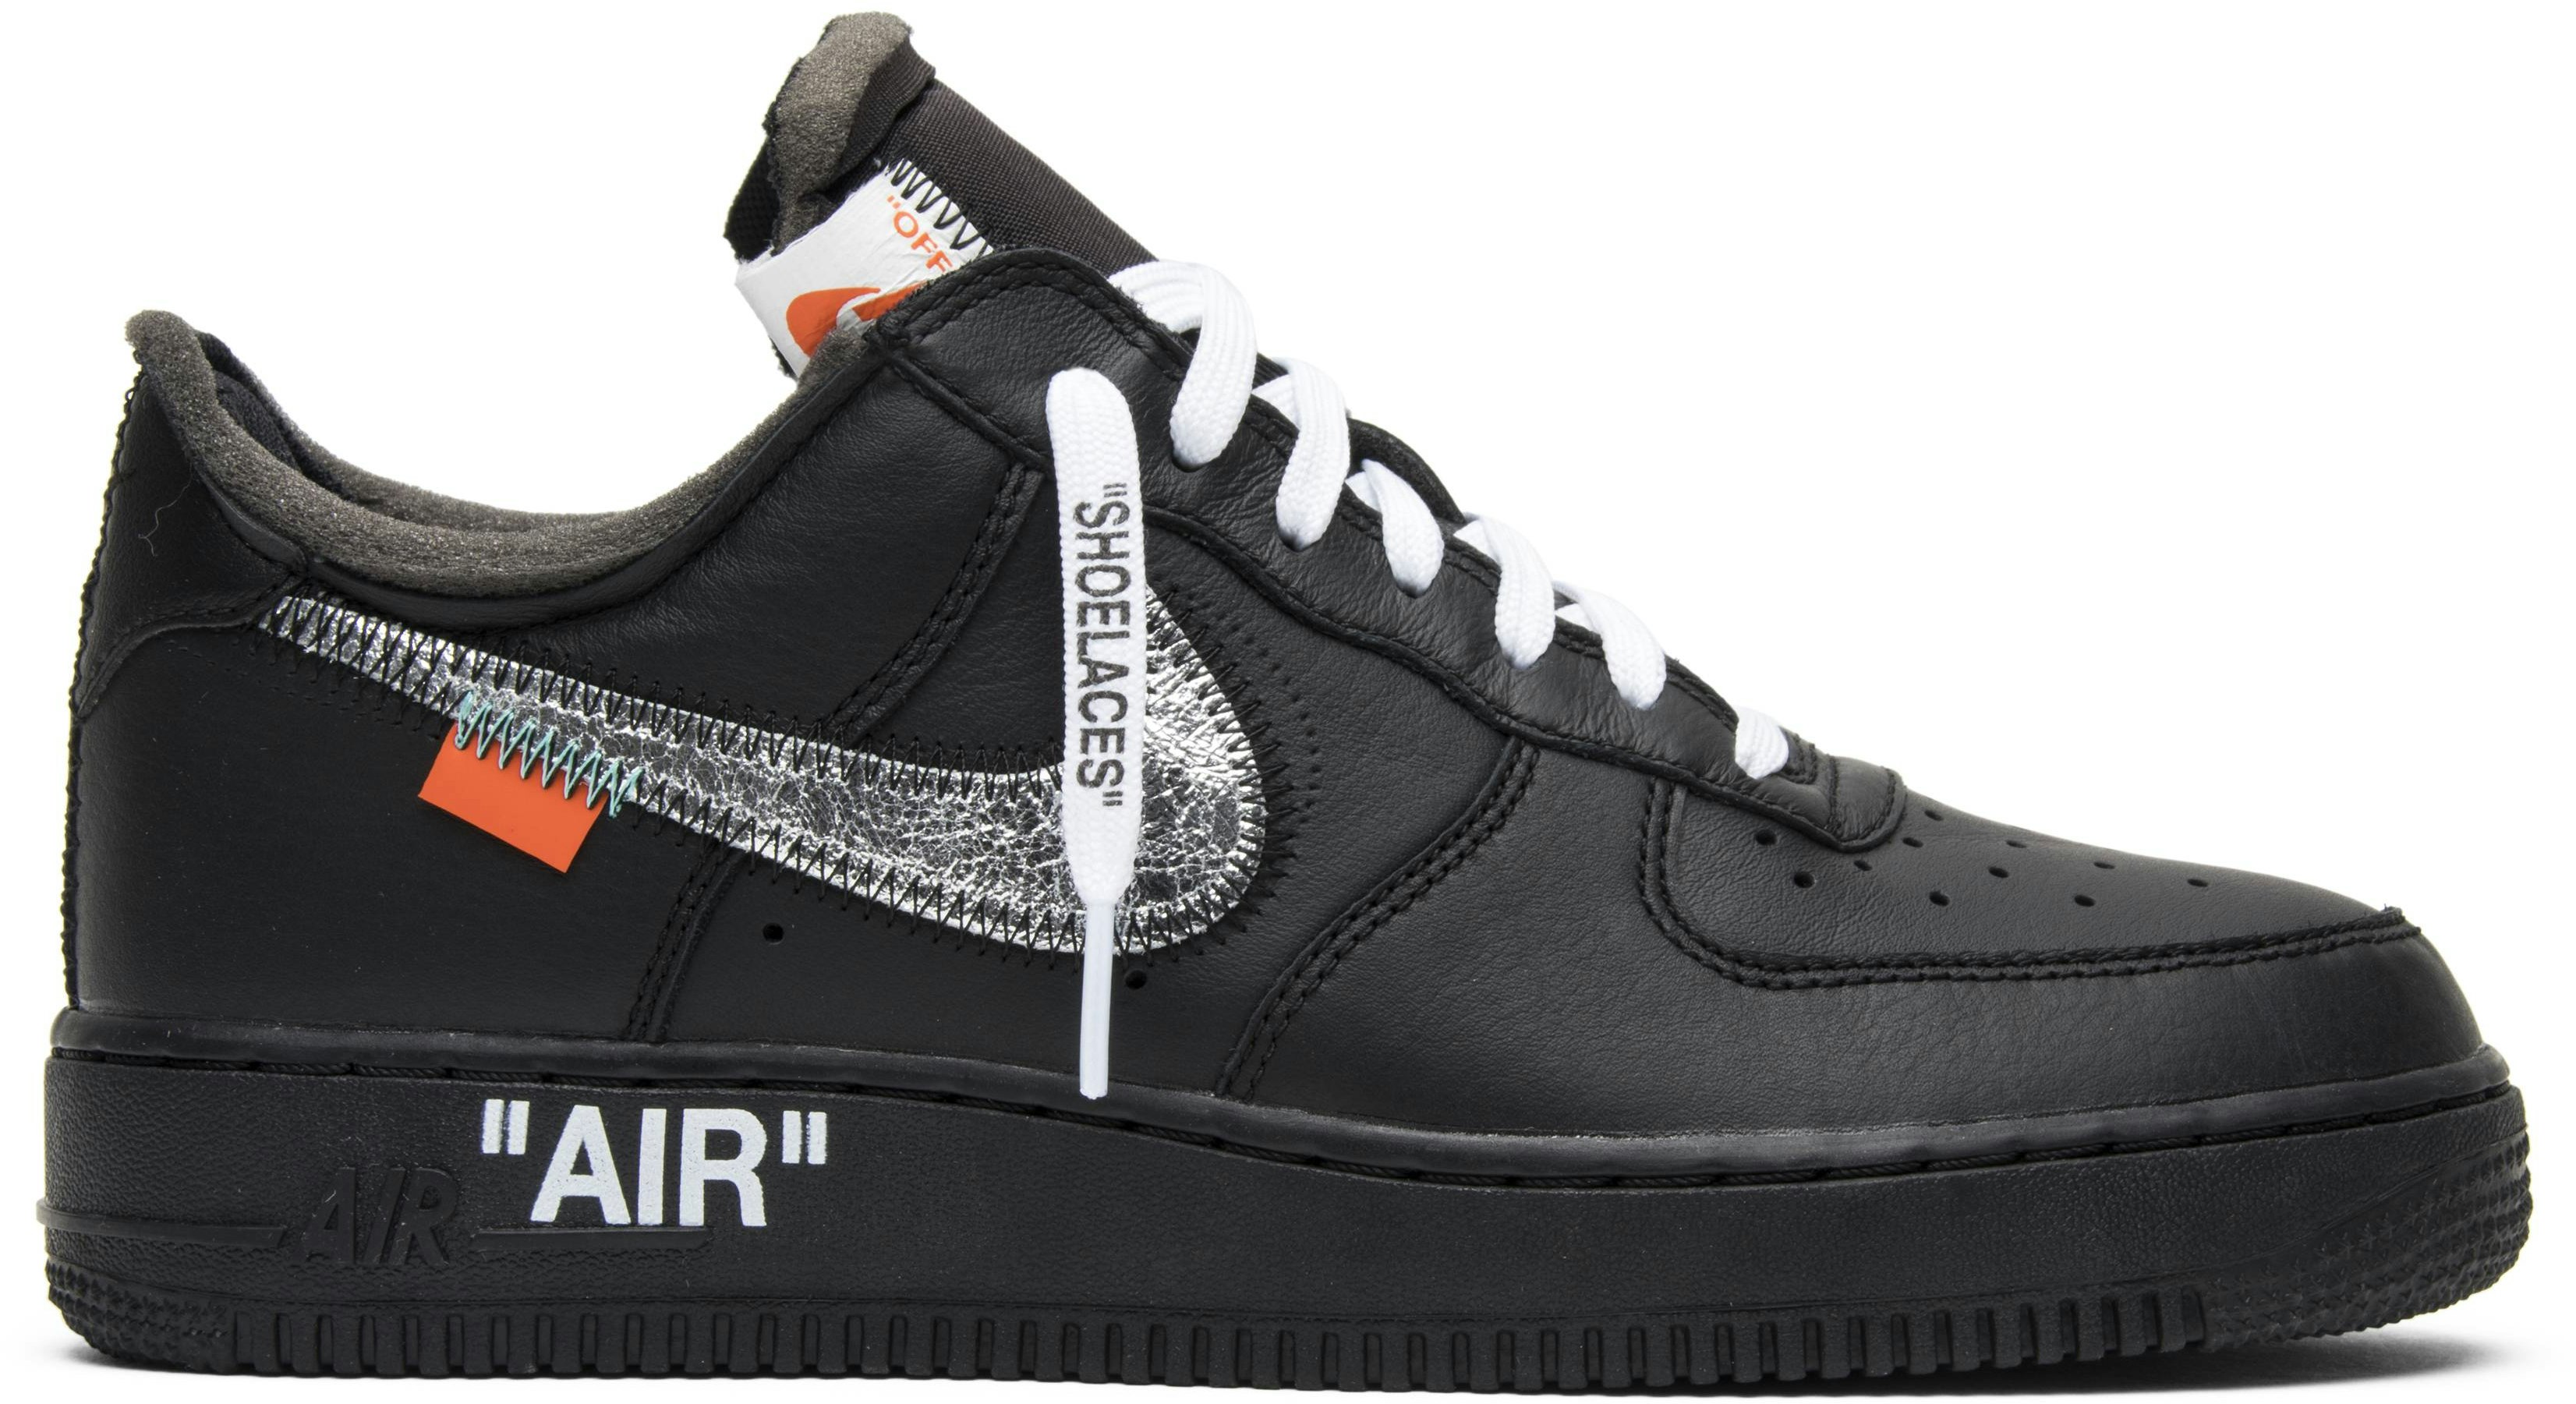 Off White Nike Air Force 1 '07 MOMA Size 7 Lightly Worn With Socks